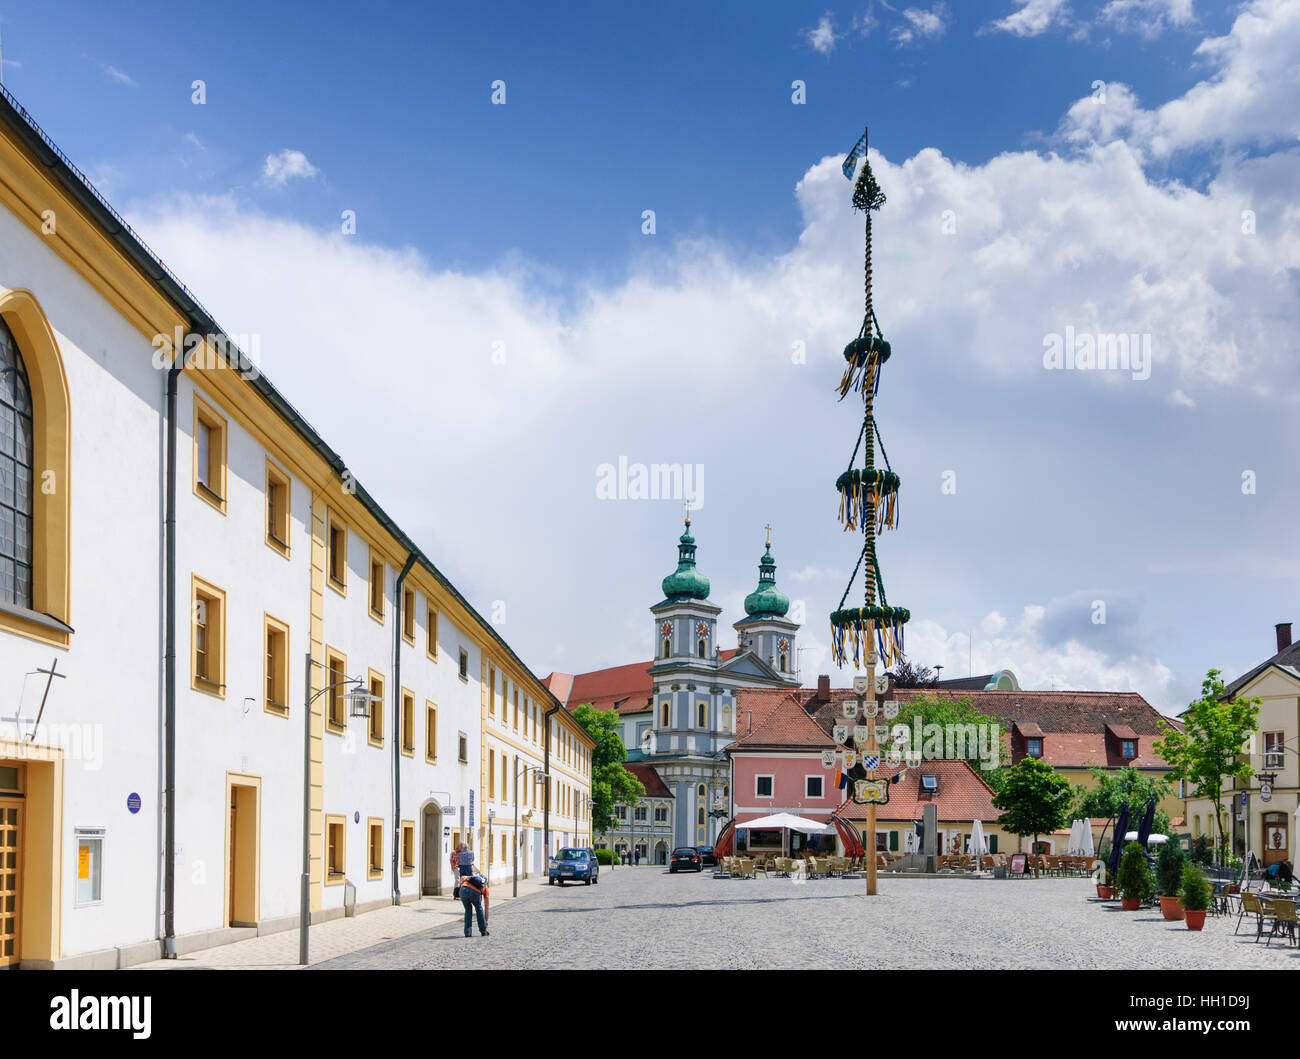 Waldsassen: Protestant peace church (on the left) and monastery basilica of the Cistercian's cloister, Oberpfalz, Upper Palatinate, Bayern, Bavaria, G Stock Photo